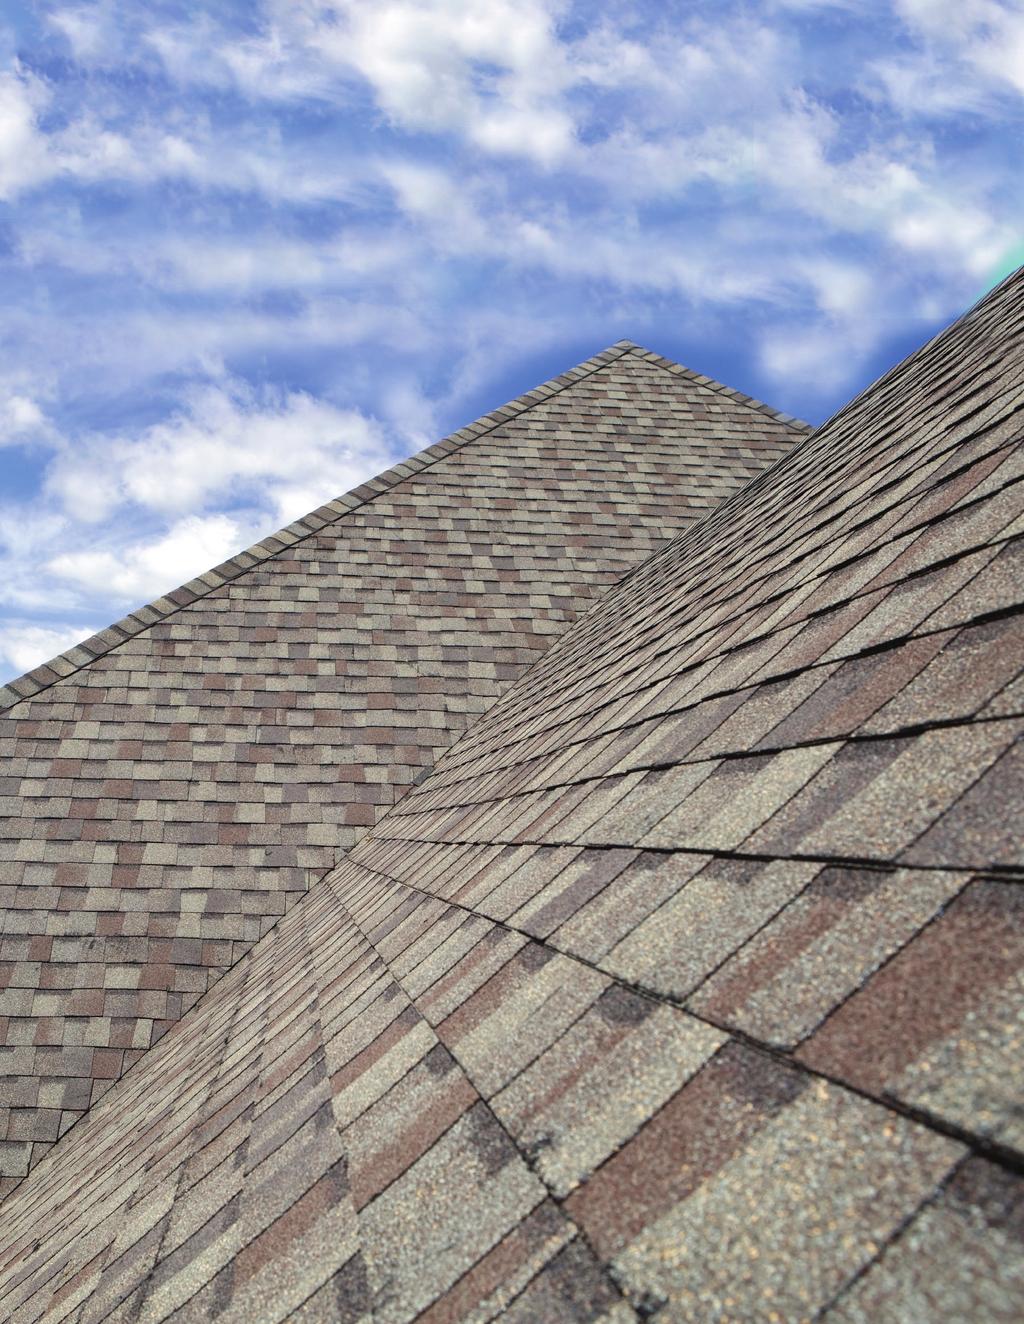 WHY IPS VENTILATION? A properly ventilated attic is essential to lowering energy costs, preventing damaging mold, condensation and ice dams and extending the life of the roof.